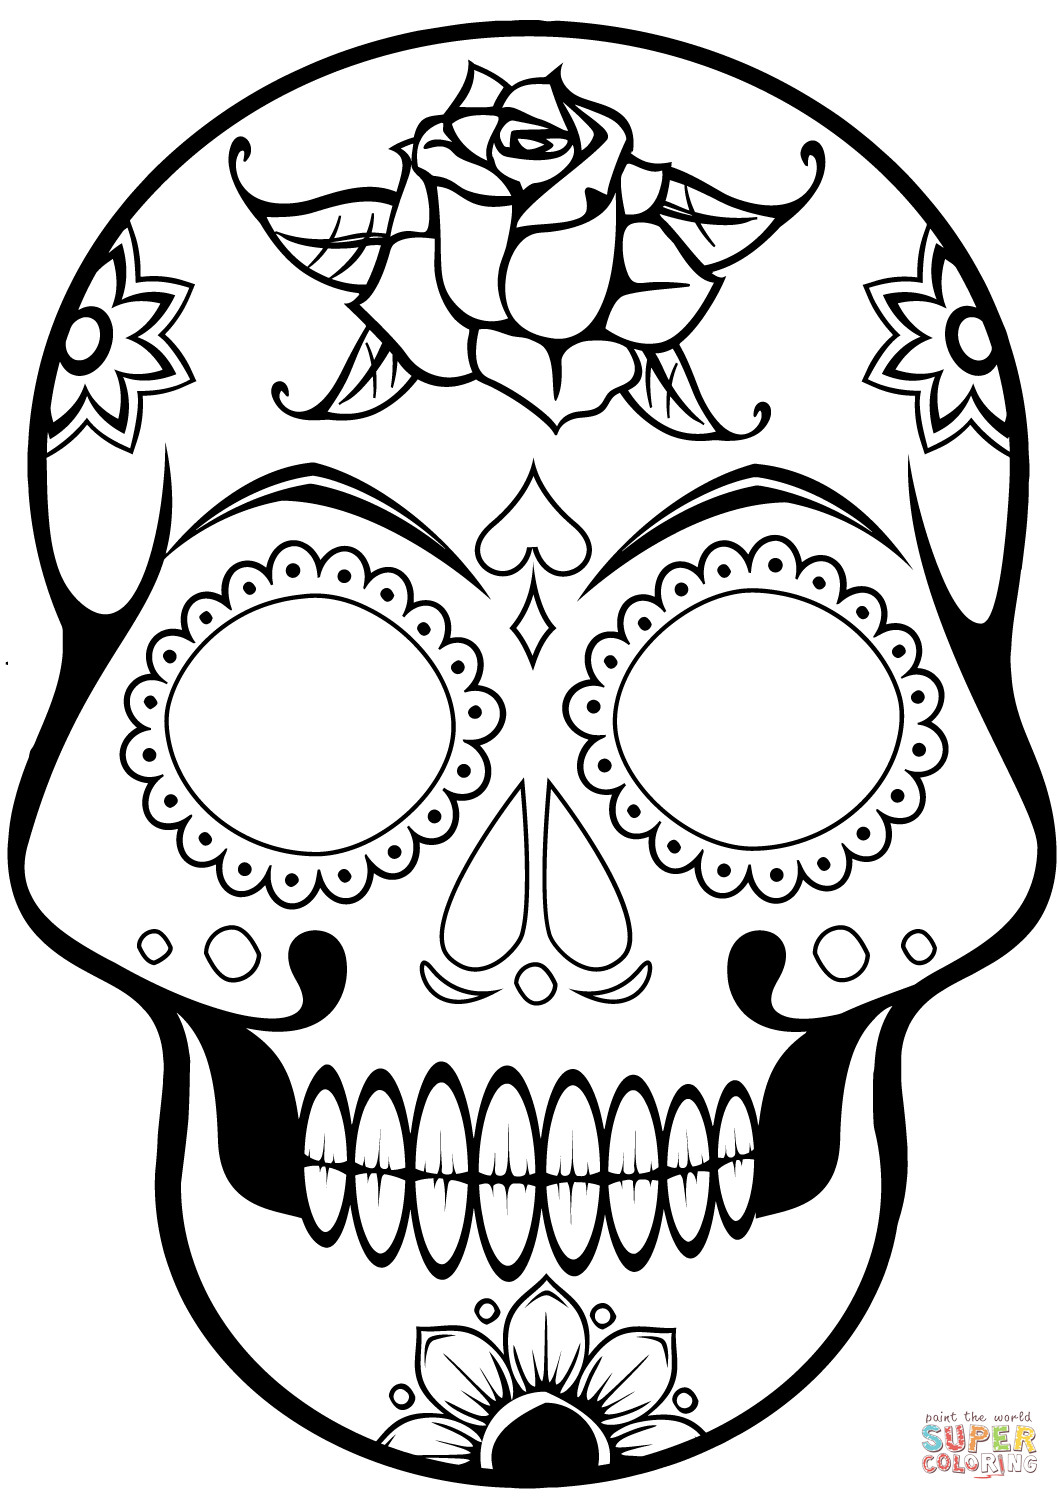 Skull Coloring Pages For Kids
 Skull Coloring Pages